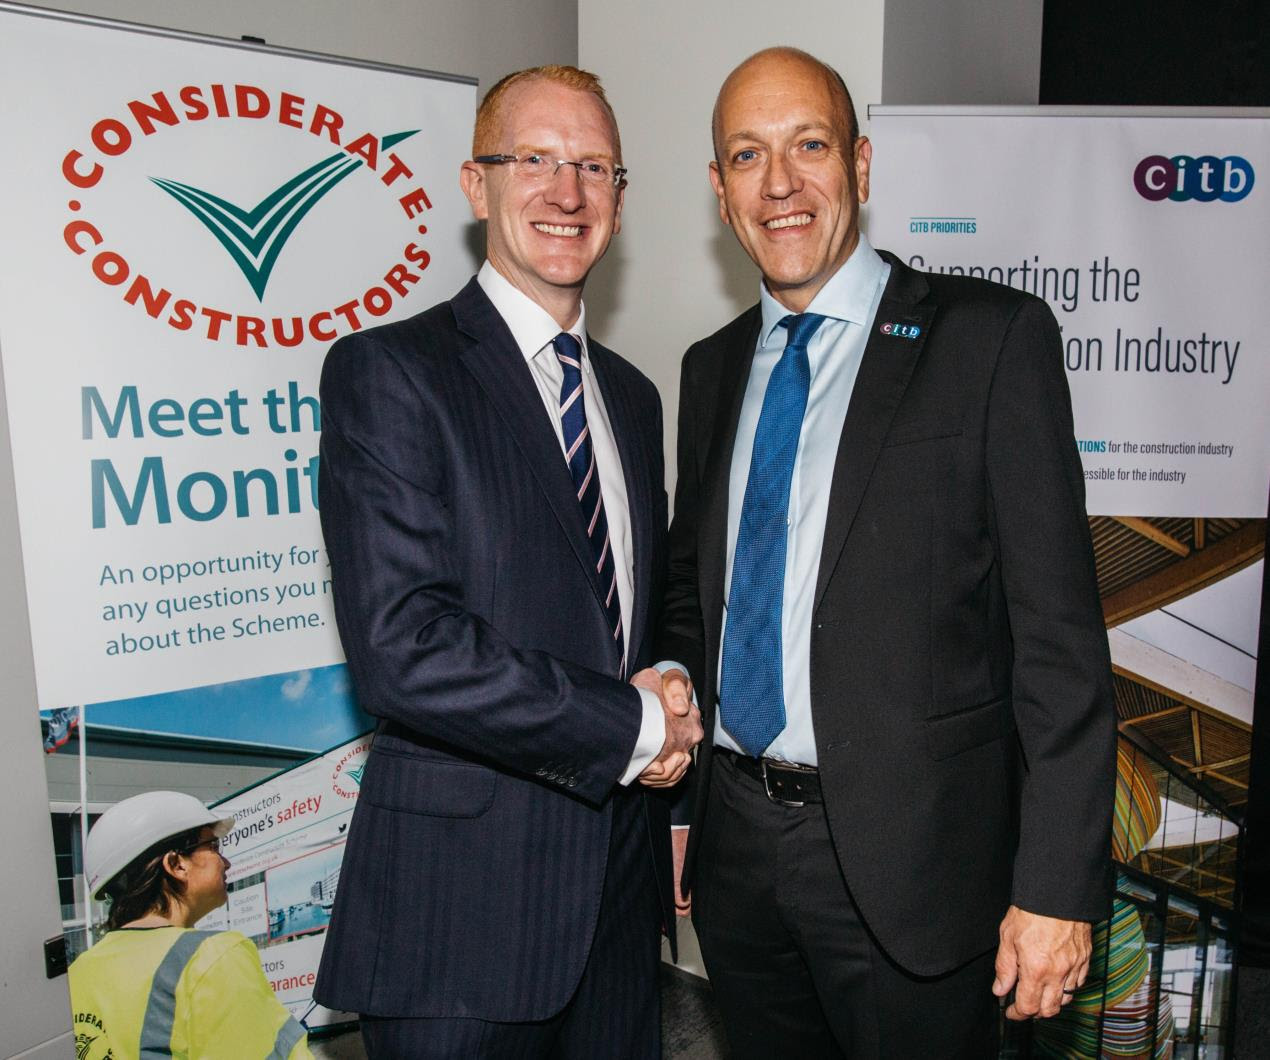 New CITB and CCS partnership to improve image of construction